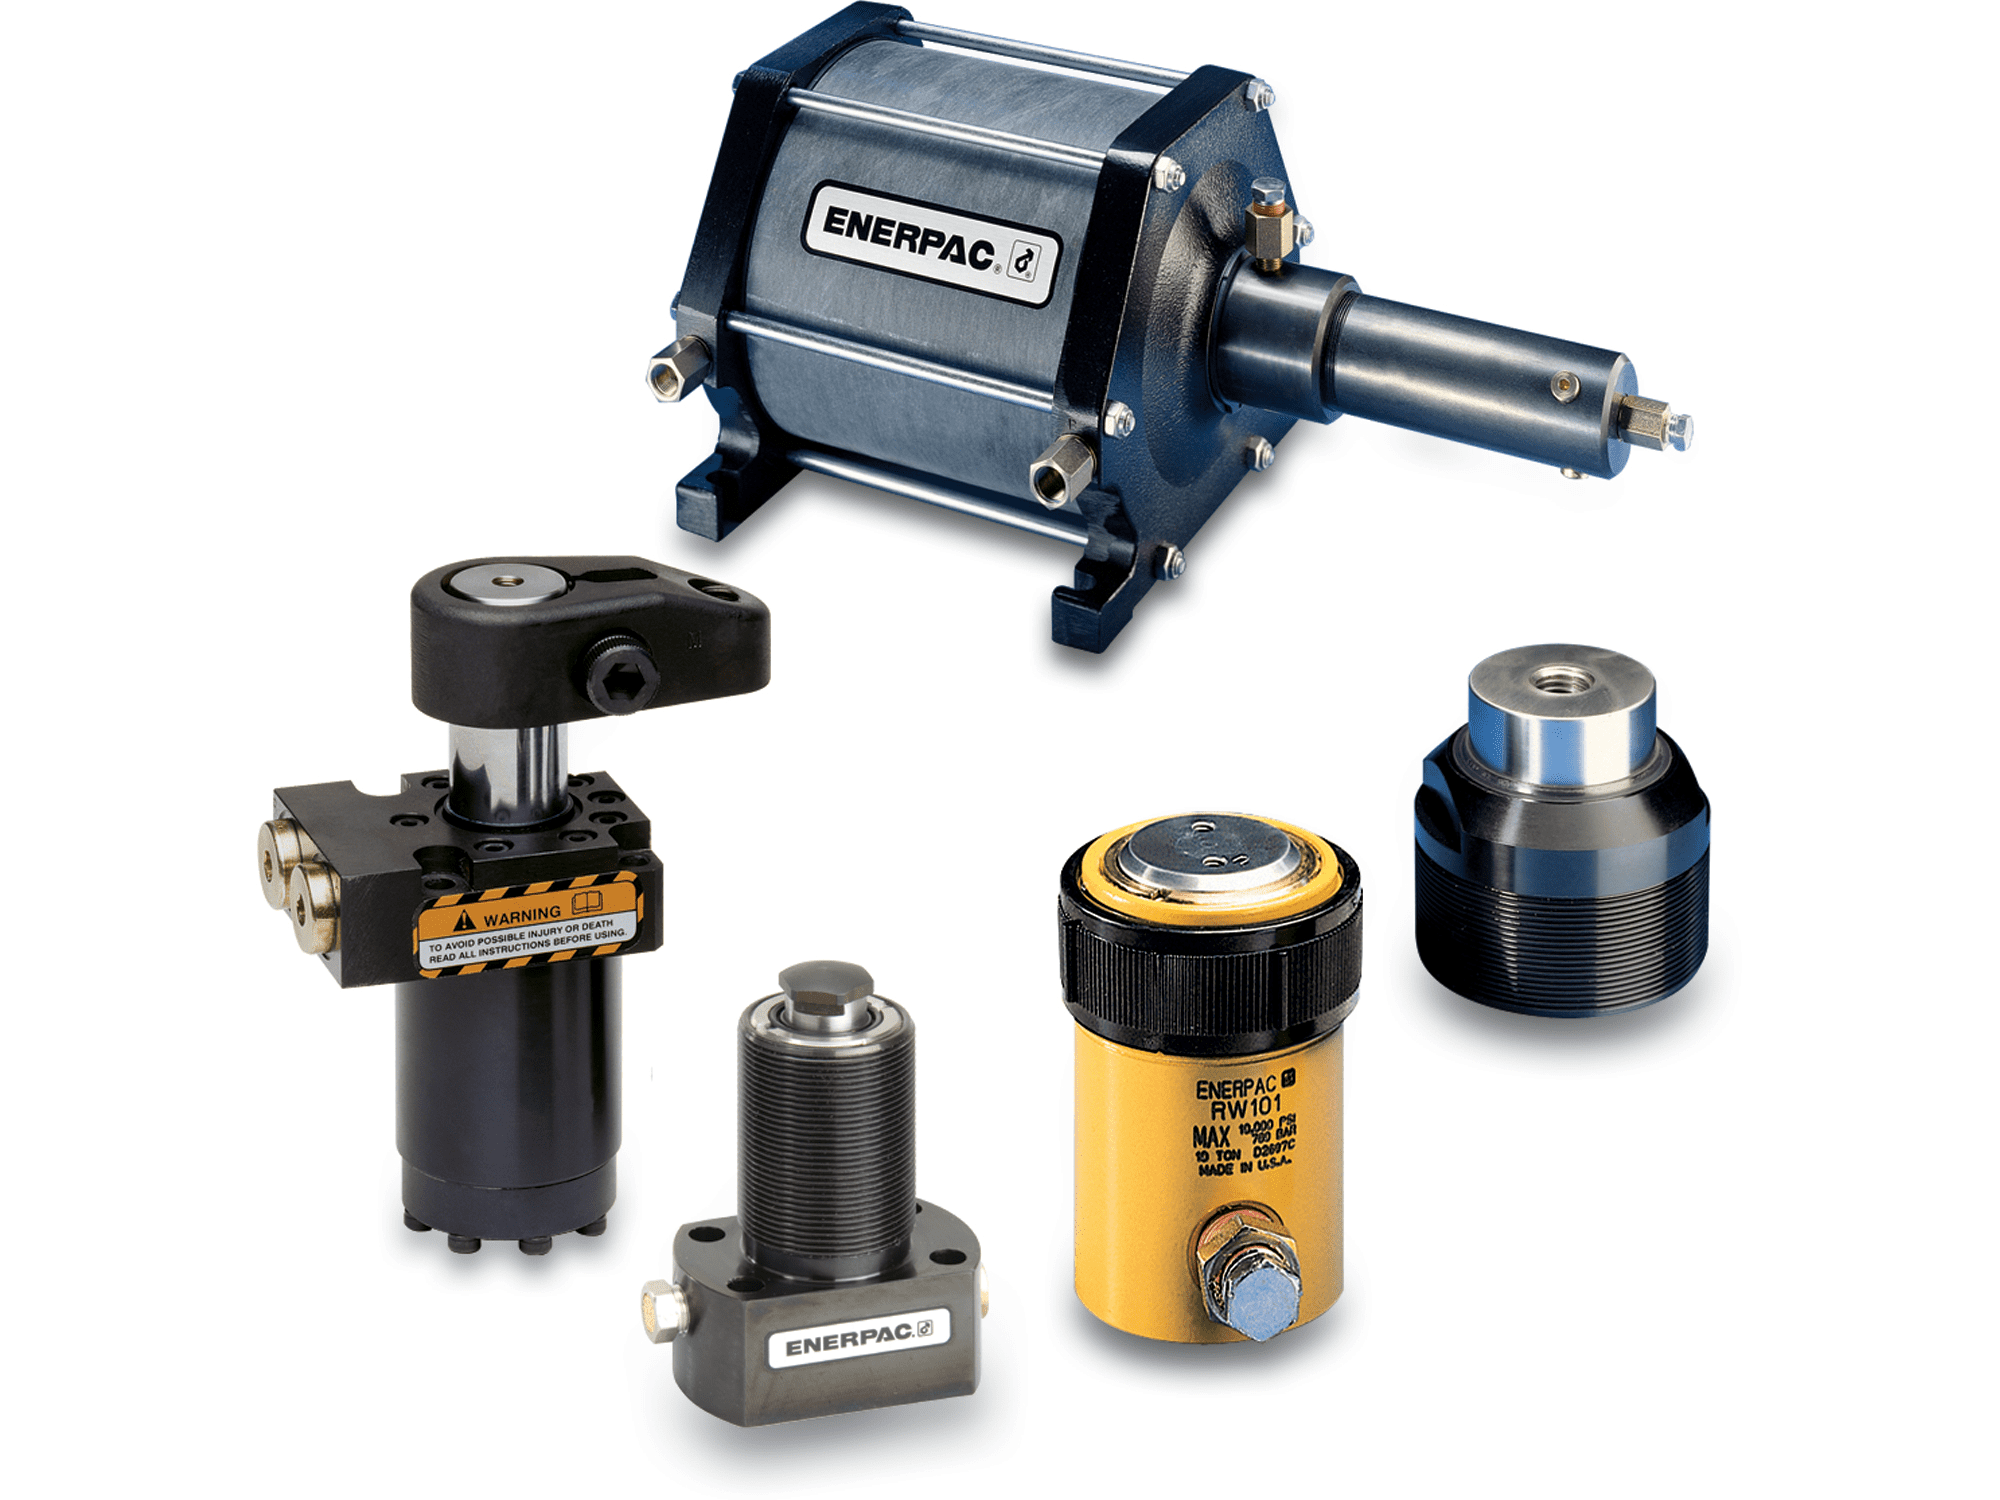 Enerpac Workholding Tools